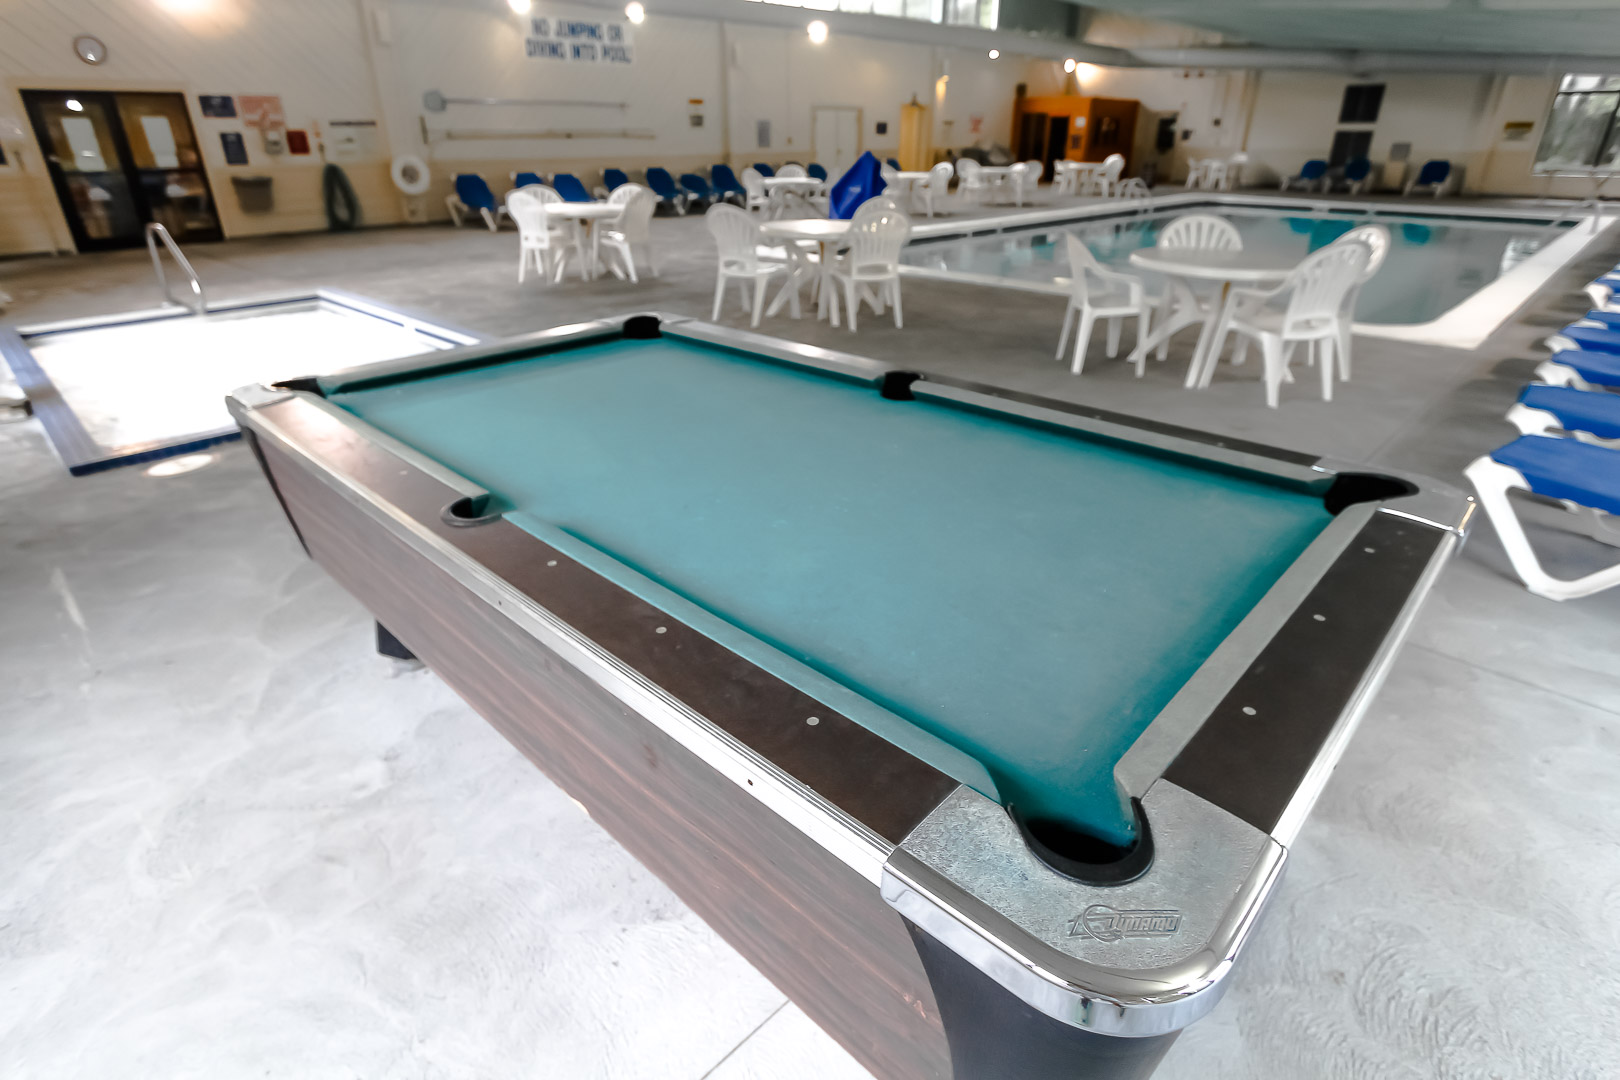 An indoor swimming pool with a pool table VRI's Sea Mist Resort in Massachusetts.